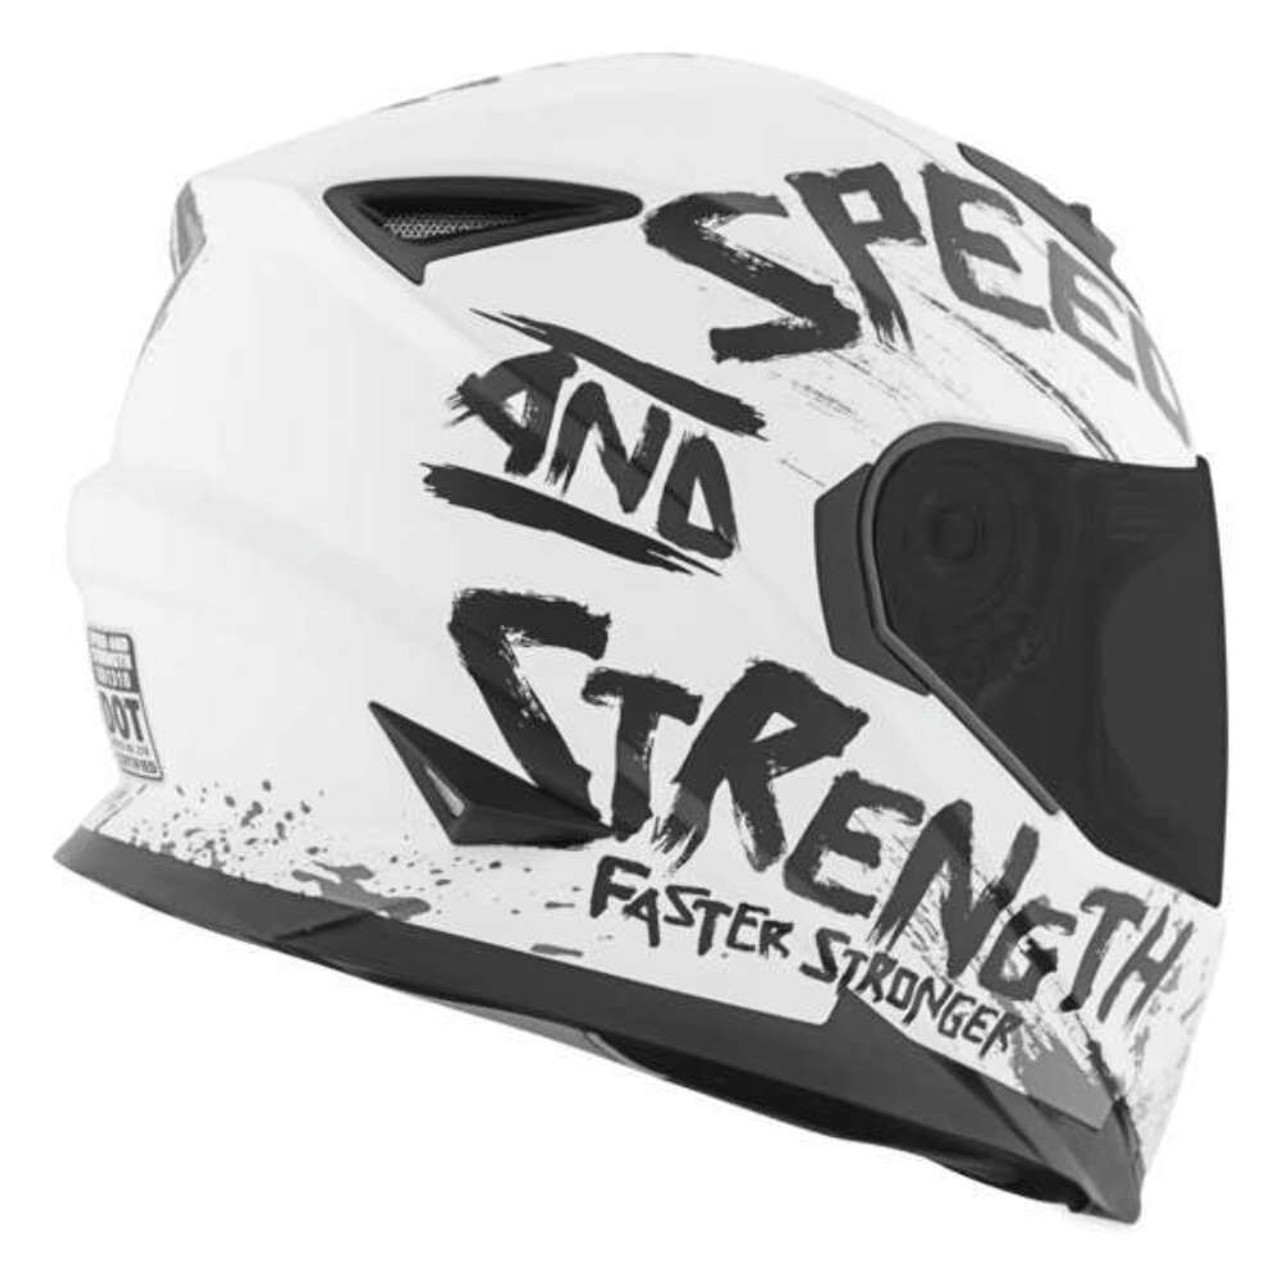 SPEED AND STRENGTH BIKES ARE IN MY BLOOD SS1310 BLACK/WHITE